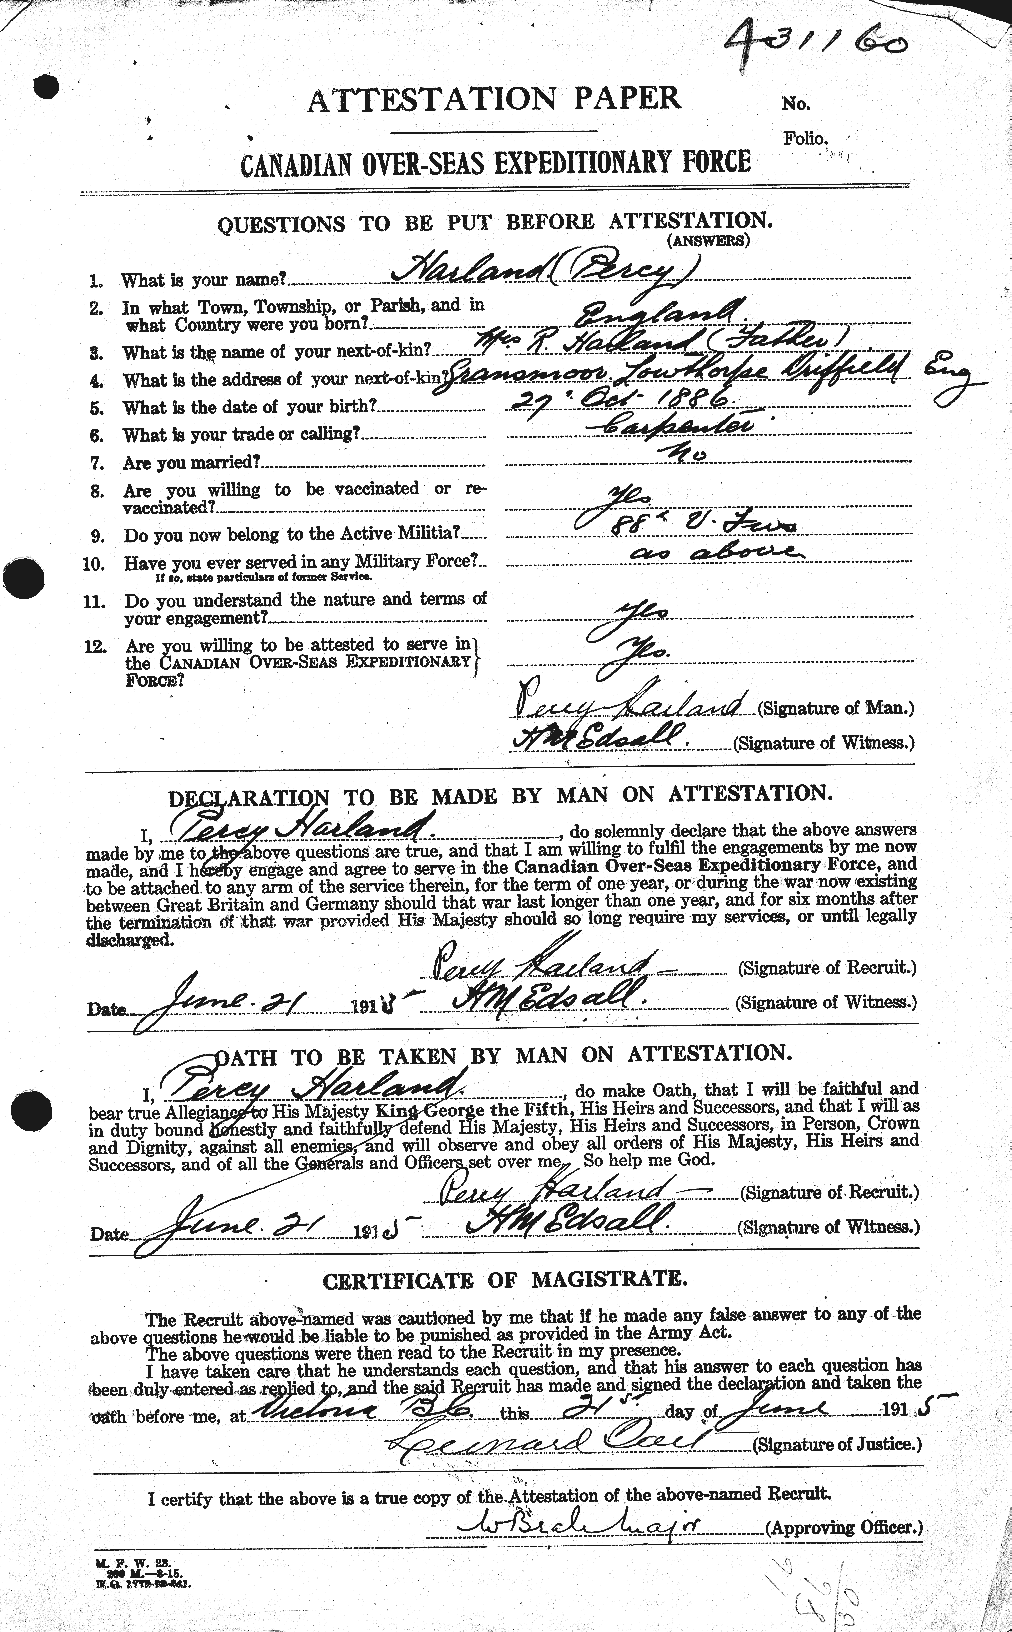 Personnel Records of the First World War - CEF 376700a